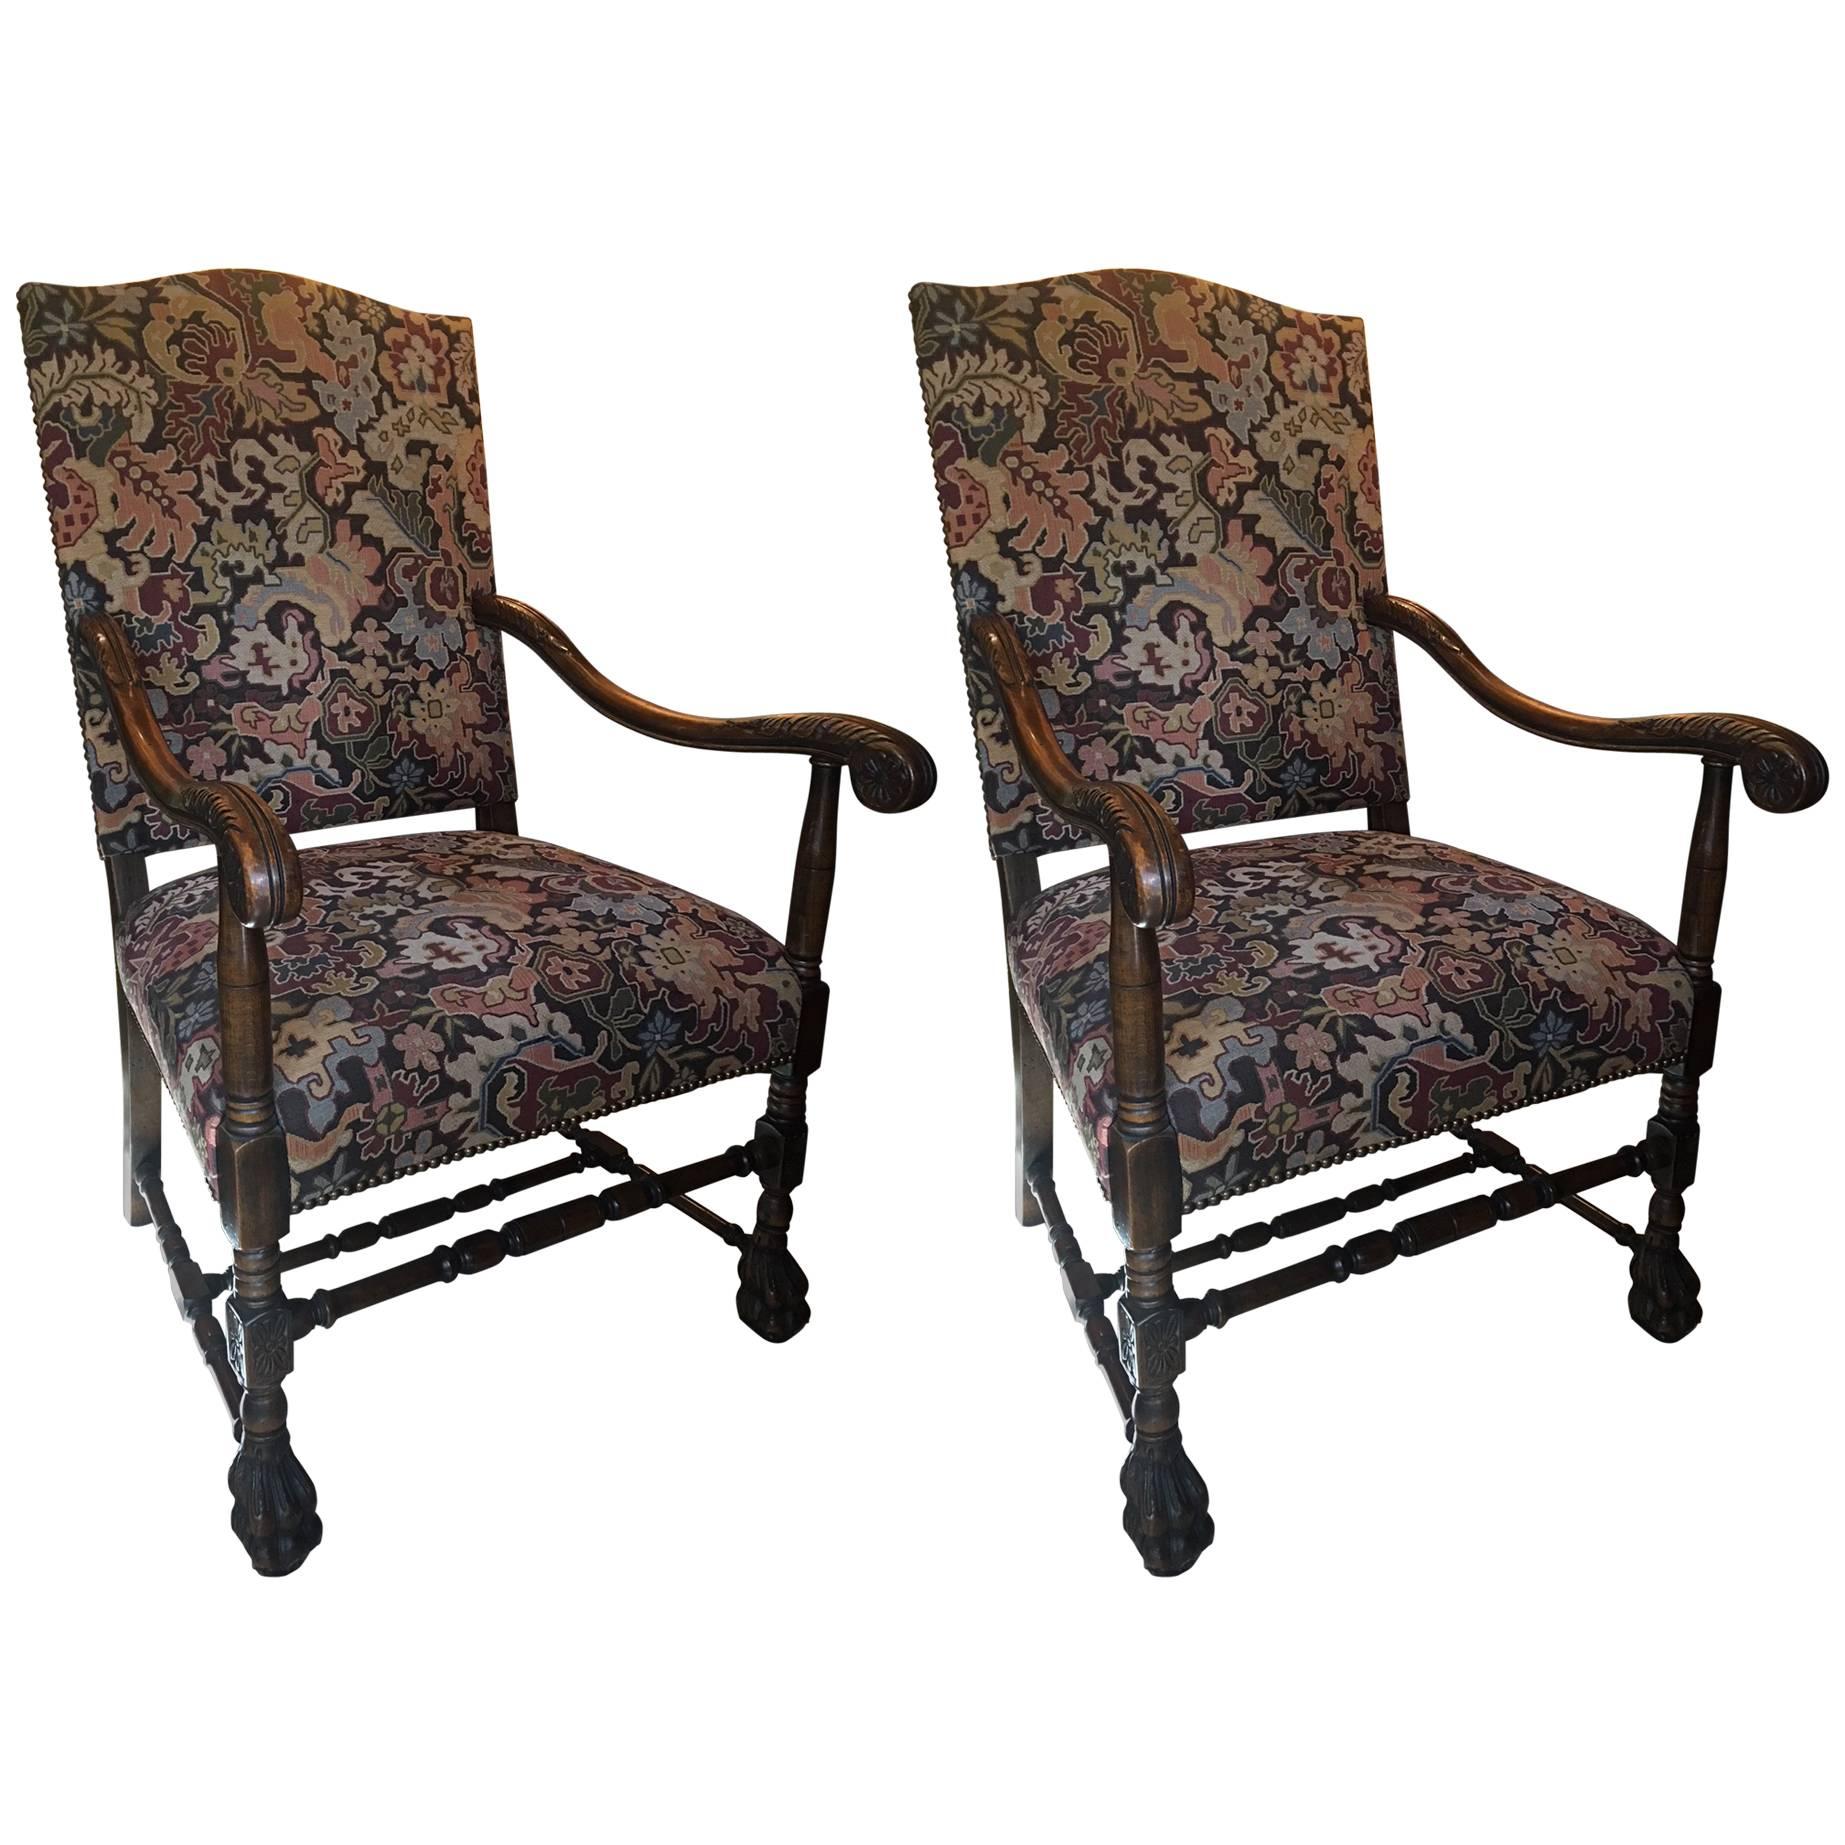 Pair of Carved Flemish Armchairs, 19th Century